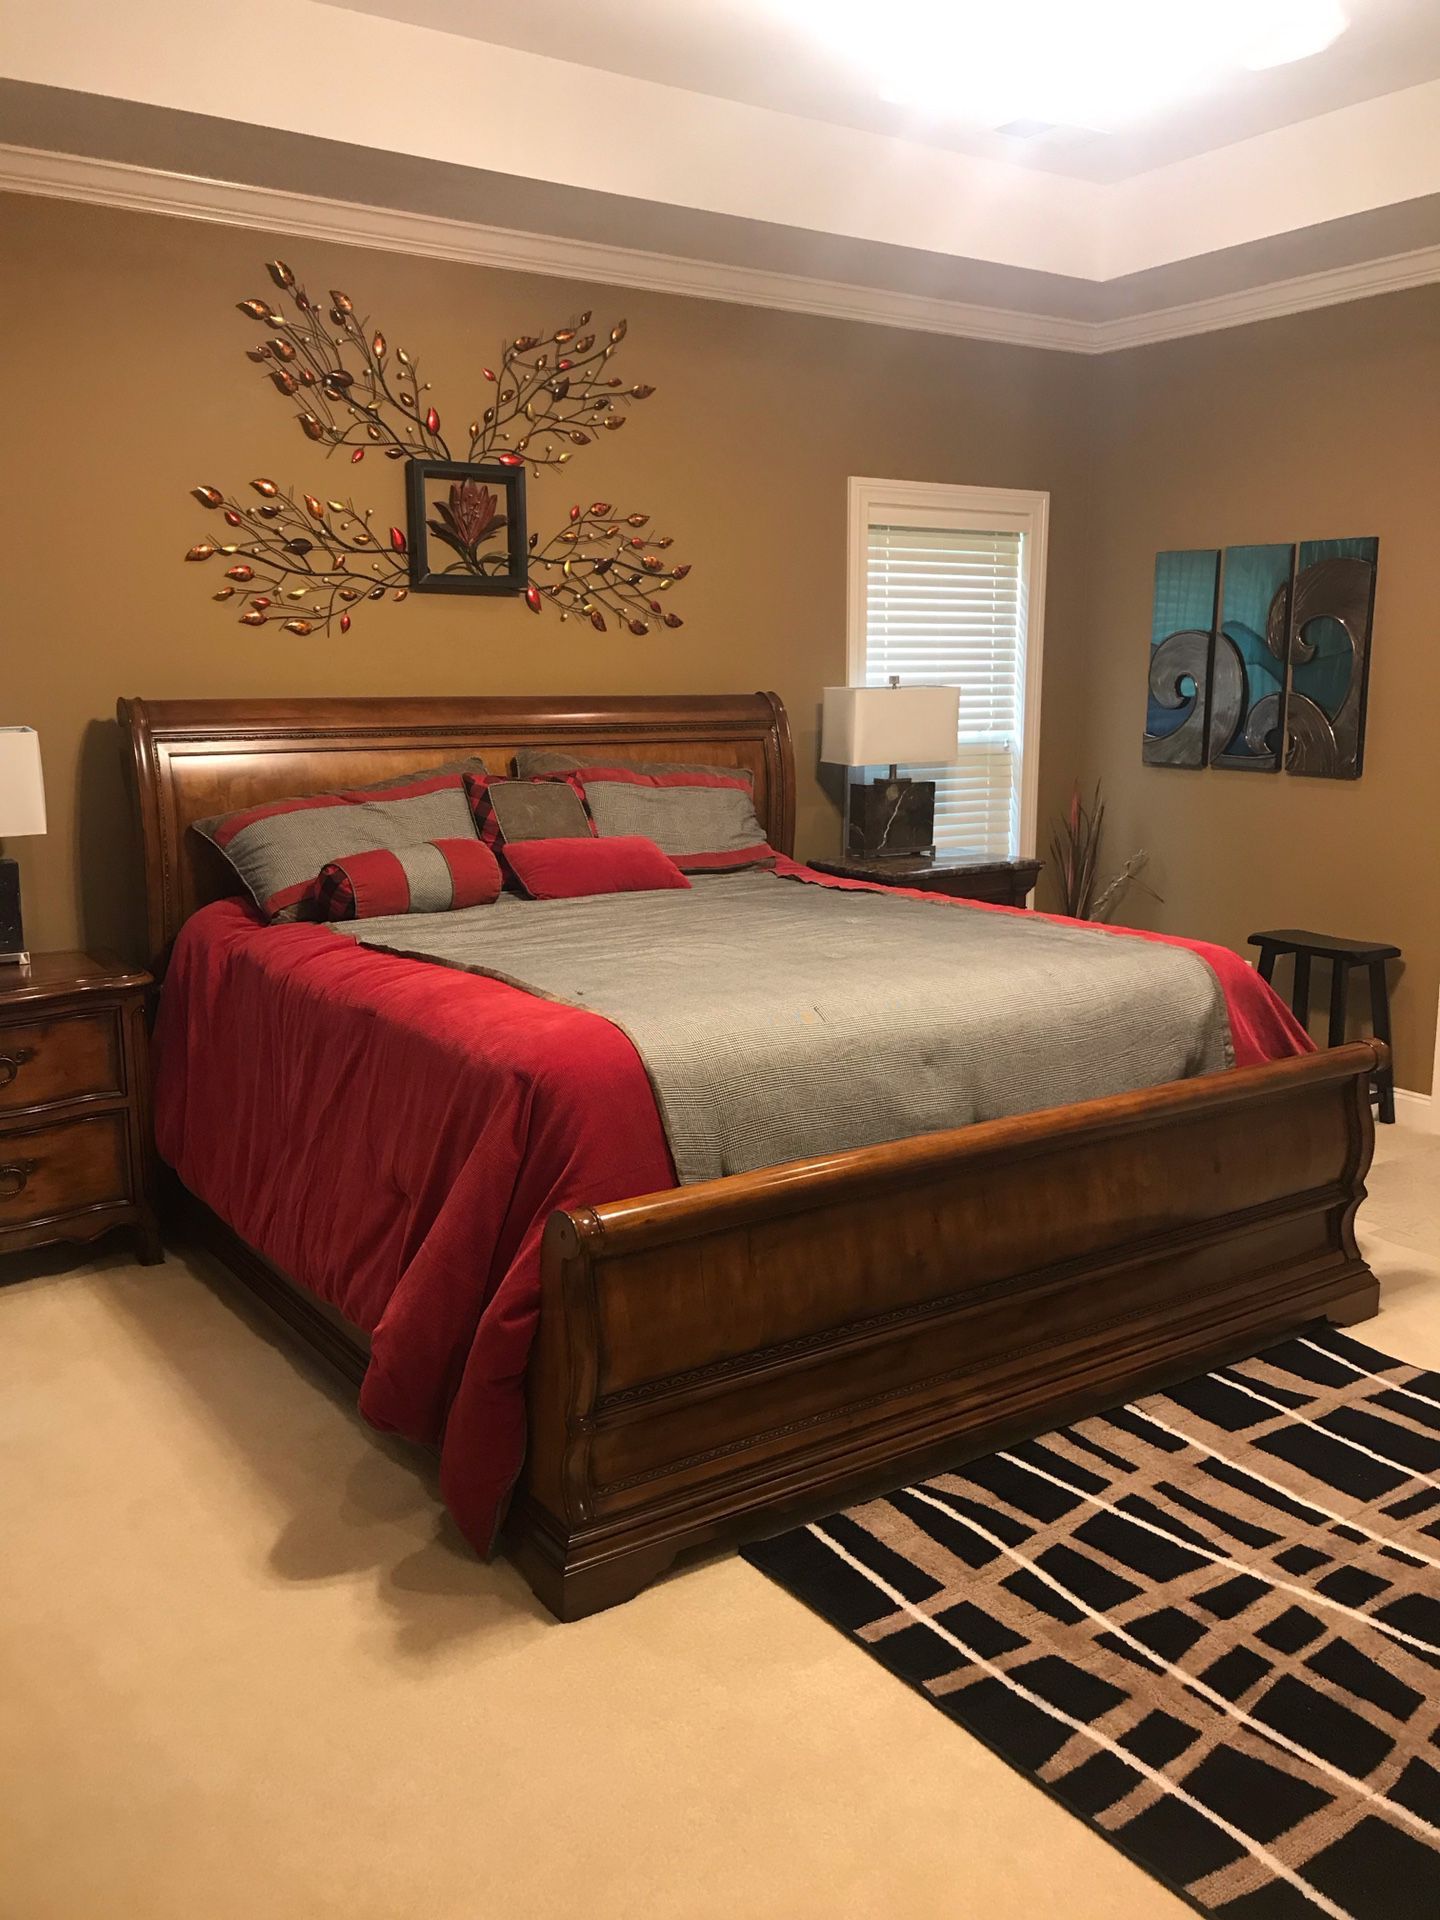 Thomasville 5 Piece King Sleigh Bed And Bedroom Set Or Pieces Sold Separately